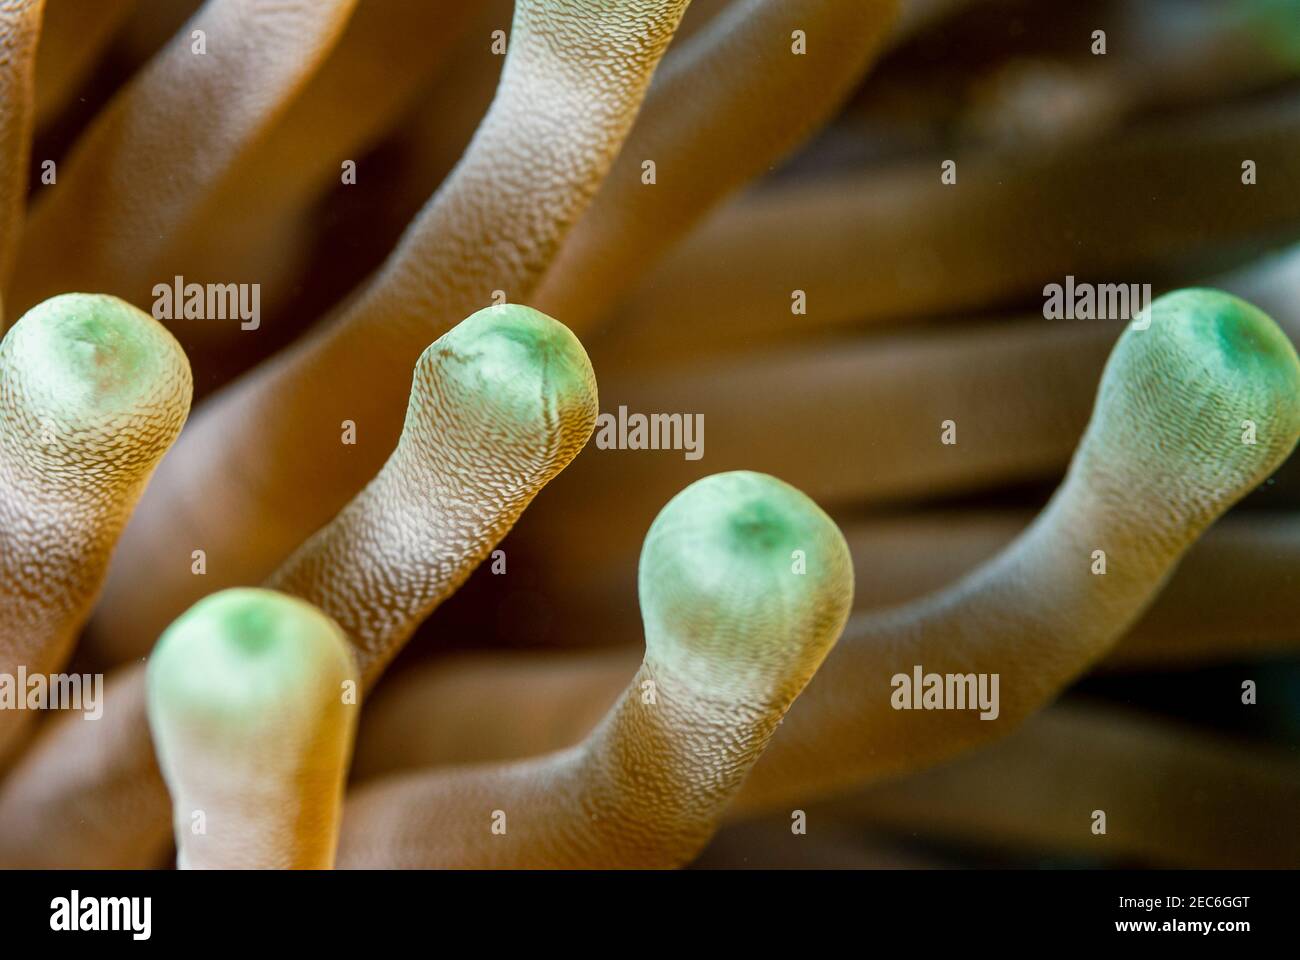 Close-up view of a common sea anemone Stock Photo